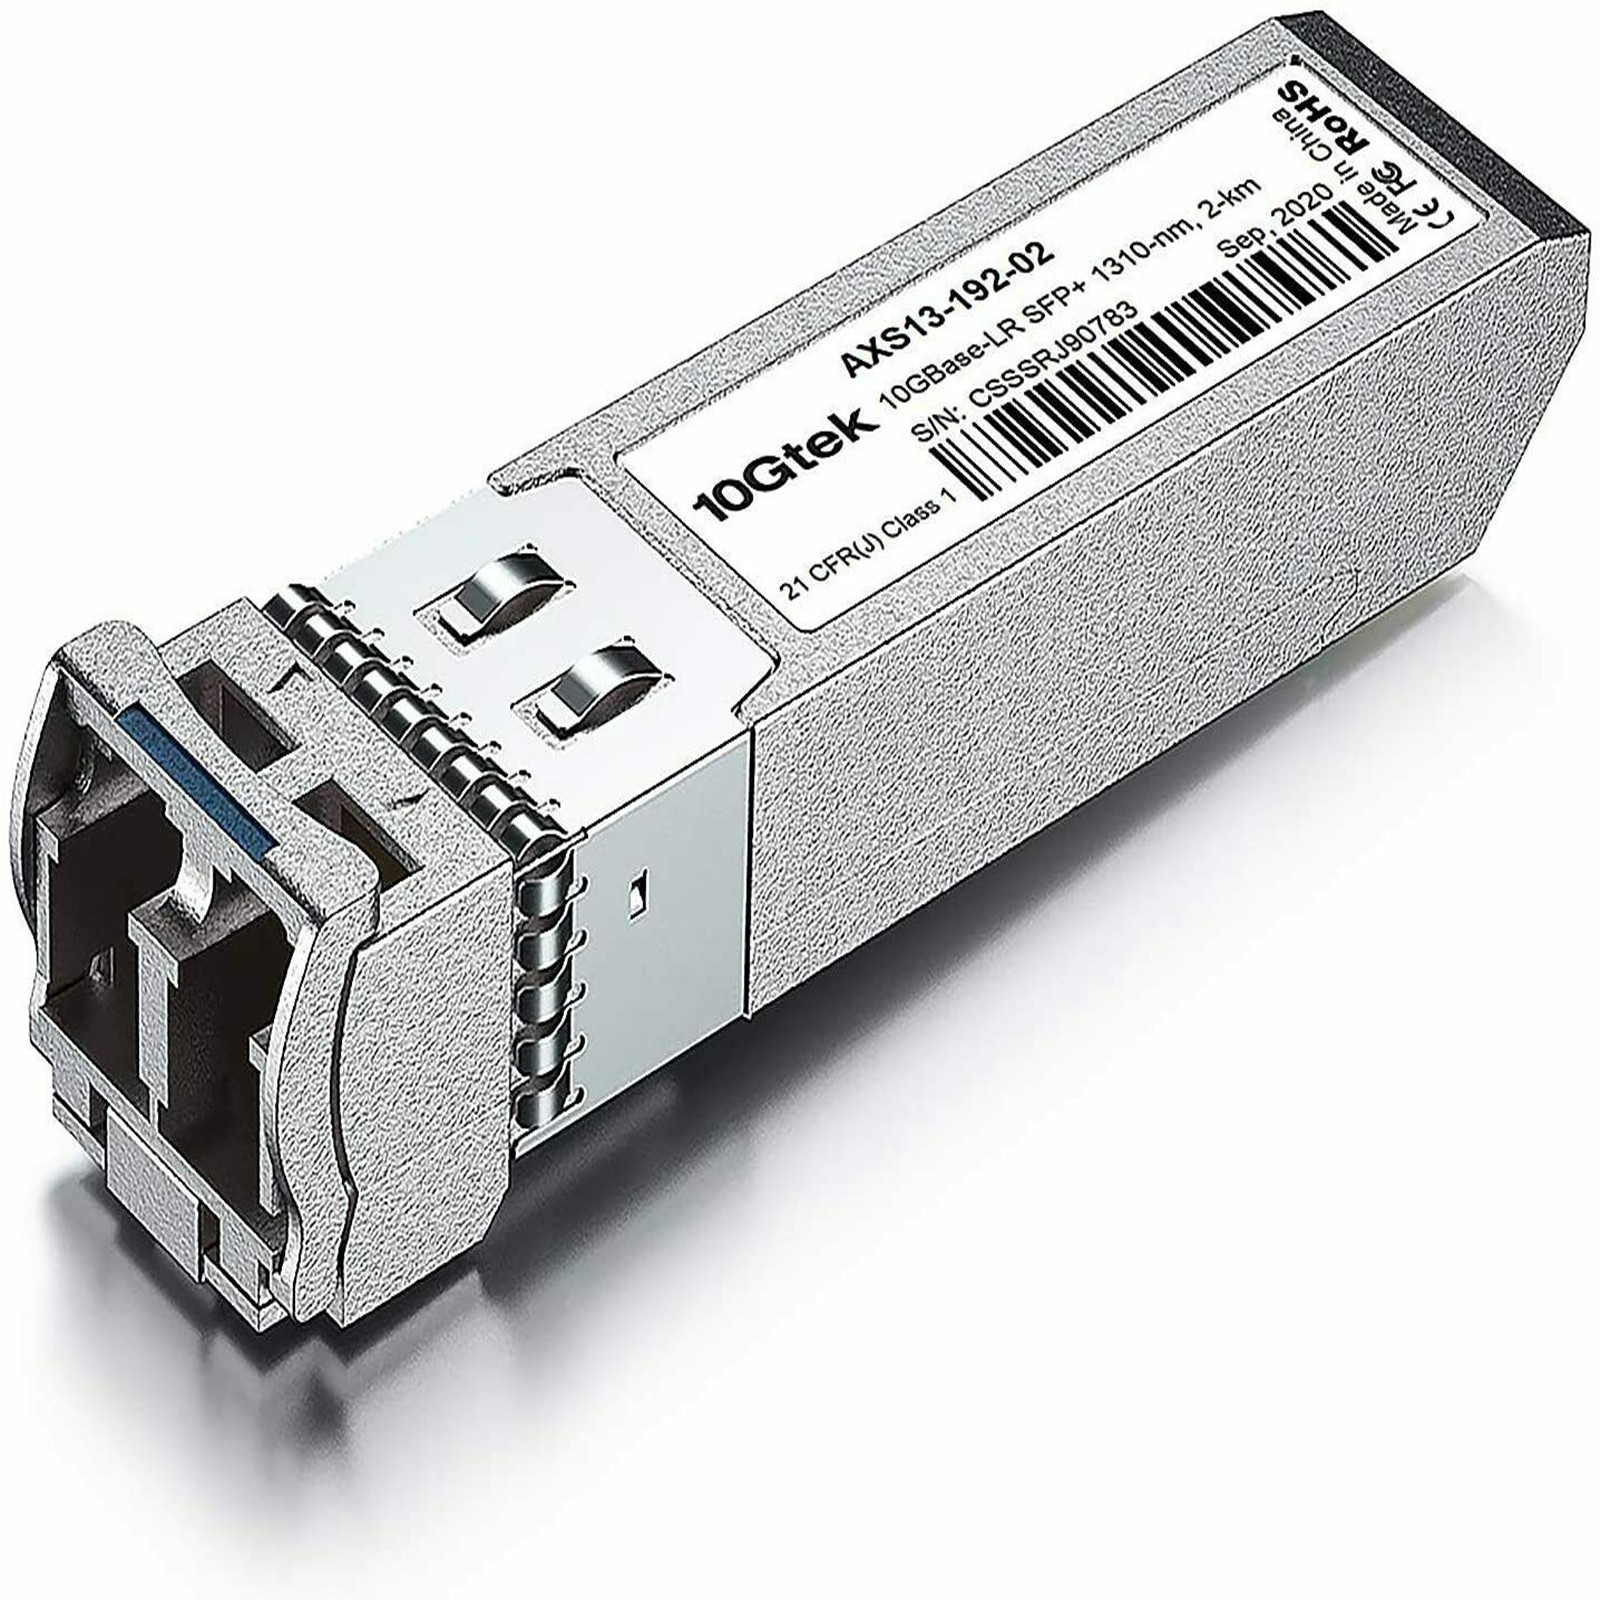 10GBase-SR SFP+ Transceiver, 10G 850nm MMF, up to 300 Meters 